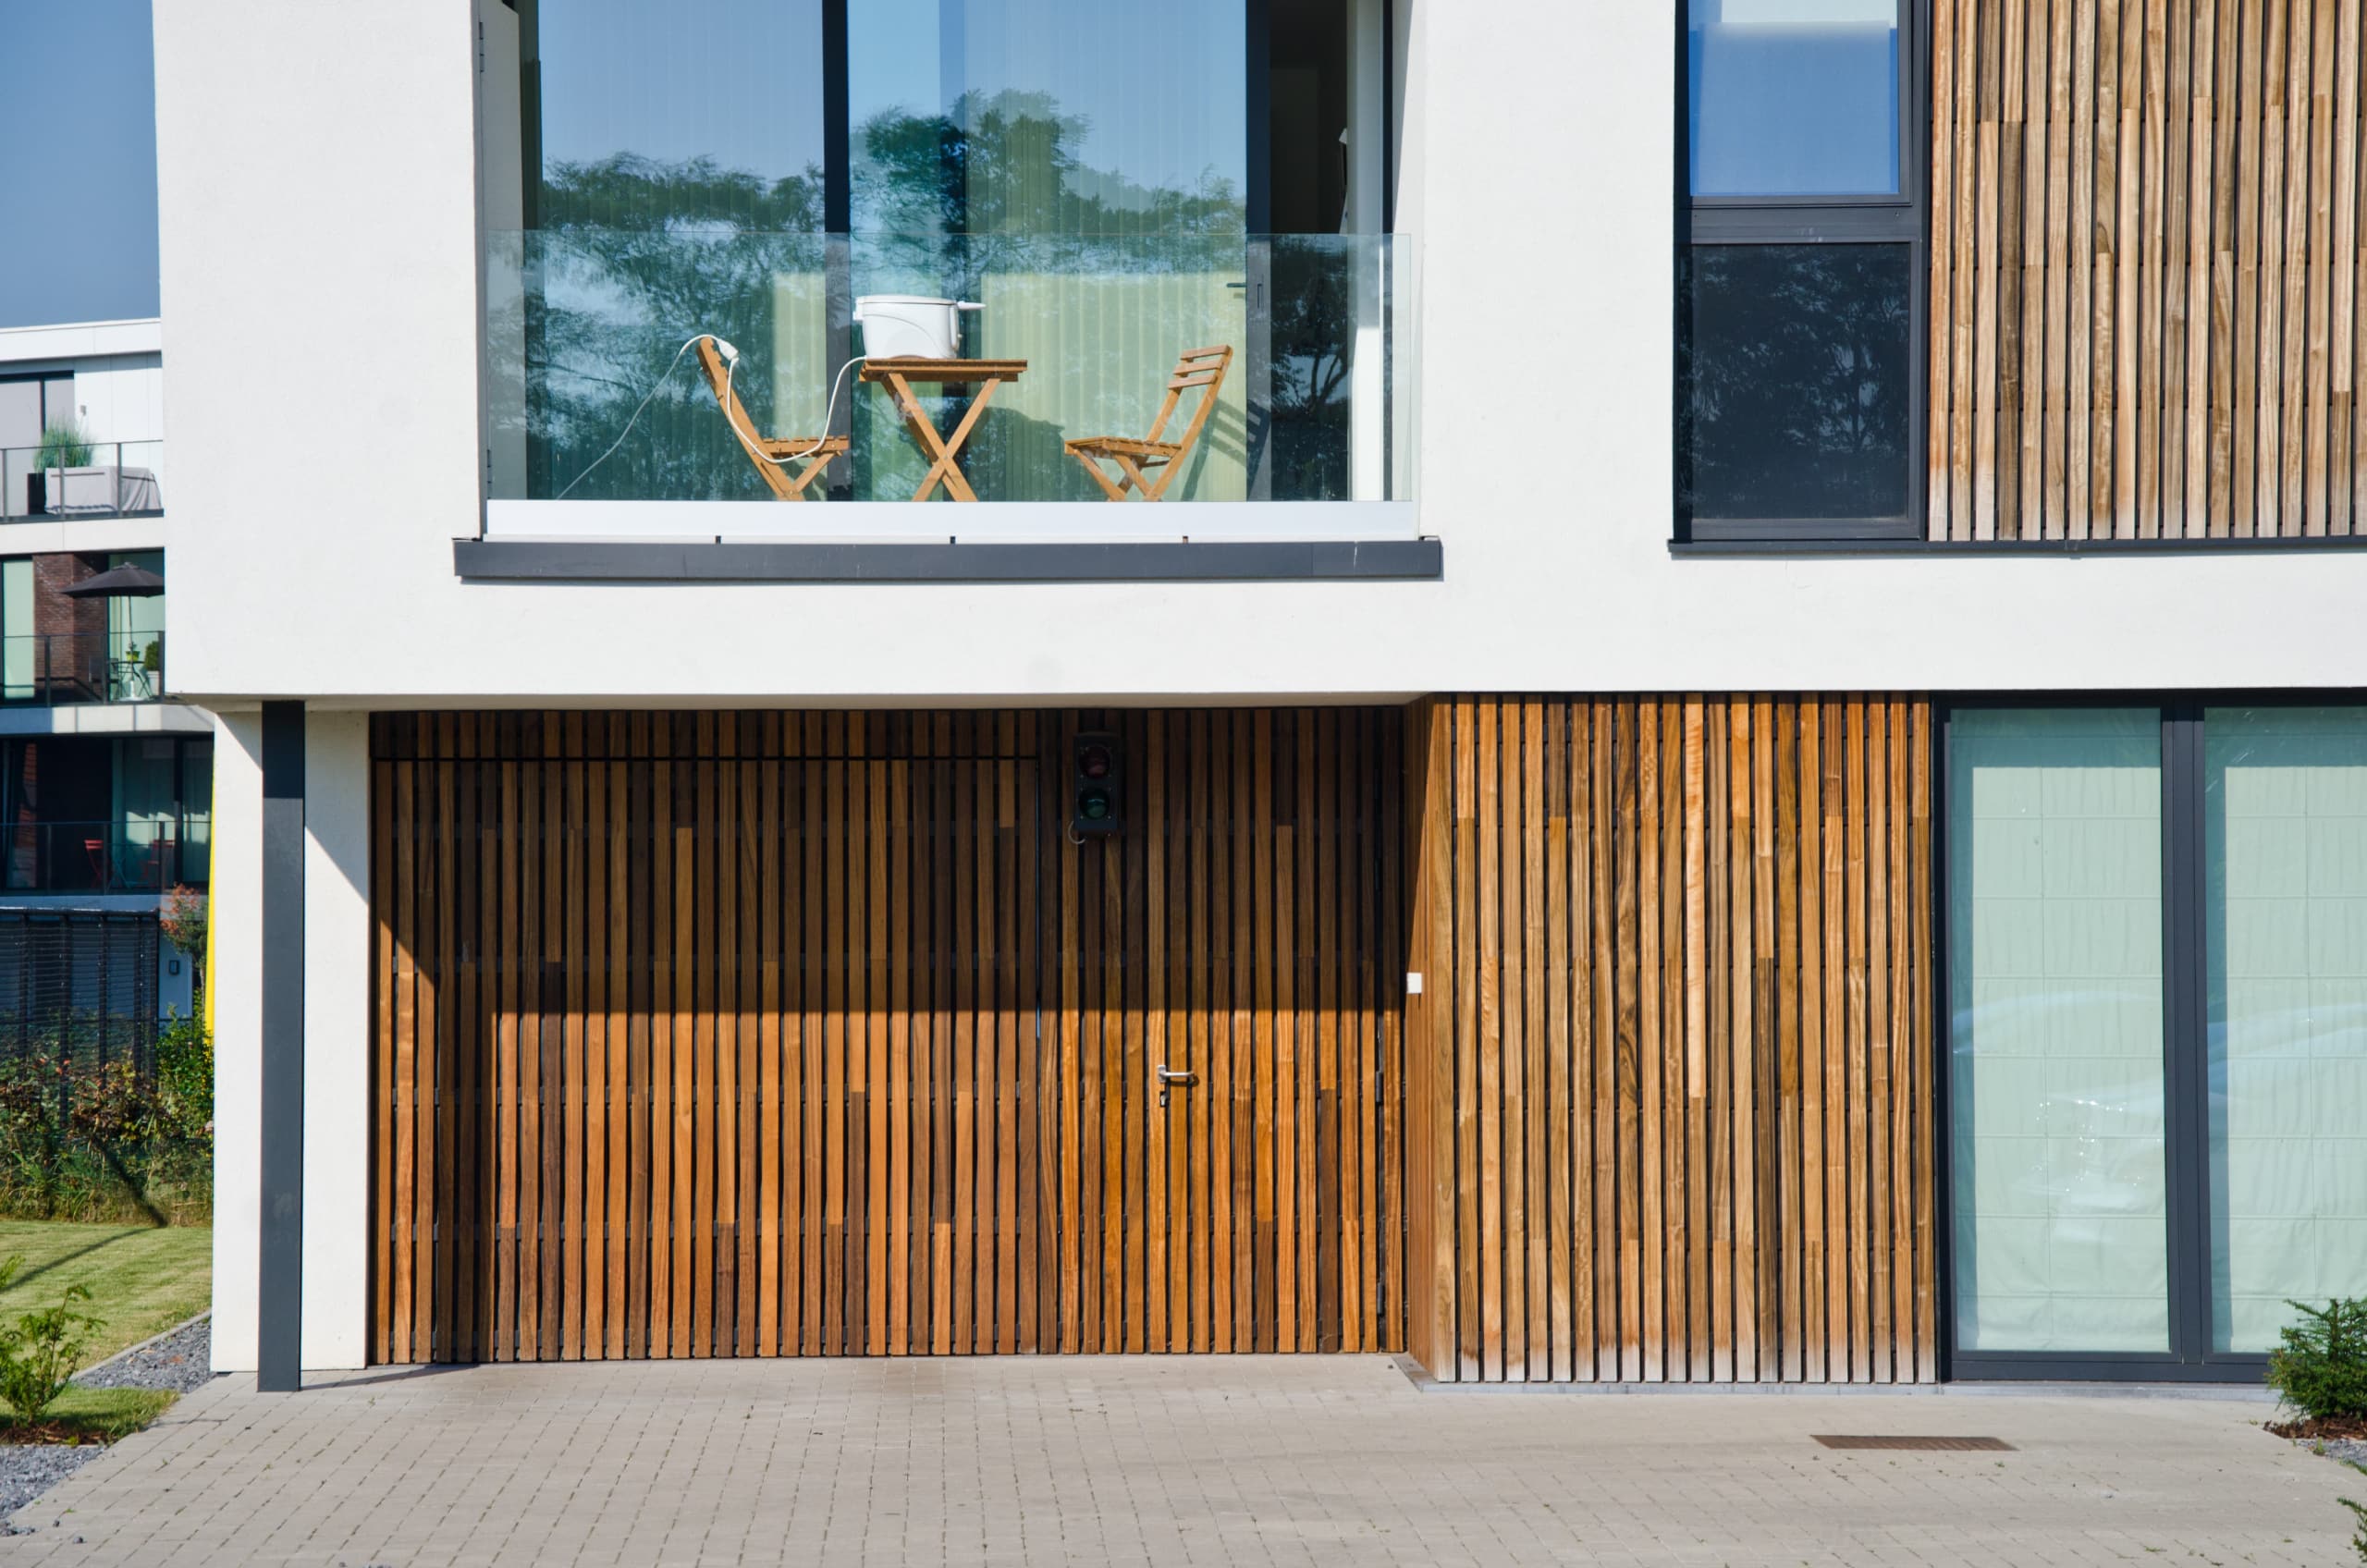 Incredible wood cladding with padauk on building in belgium with a garage door in wood cladding without visible fixations vetedy techniclic